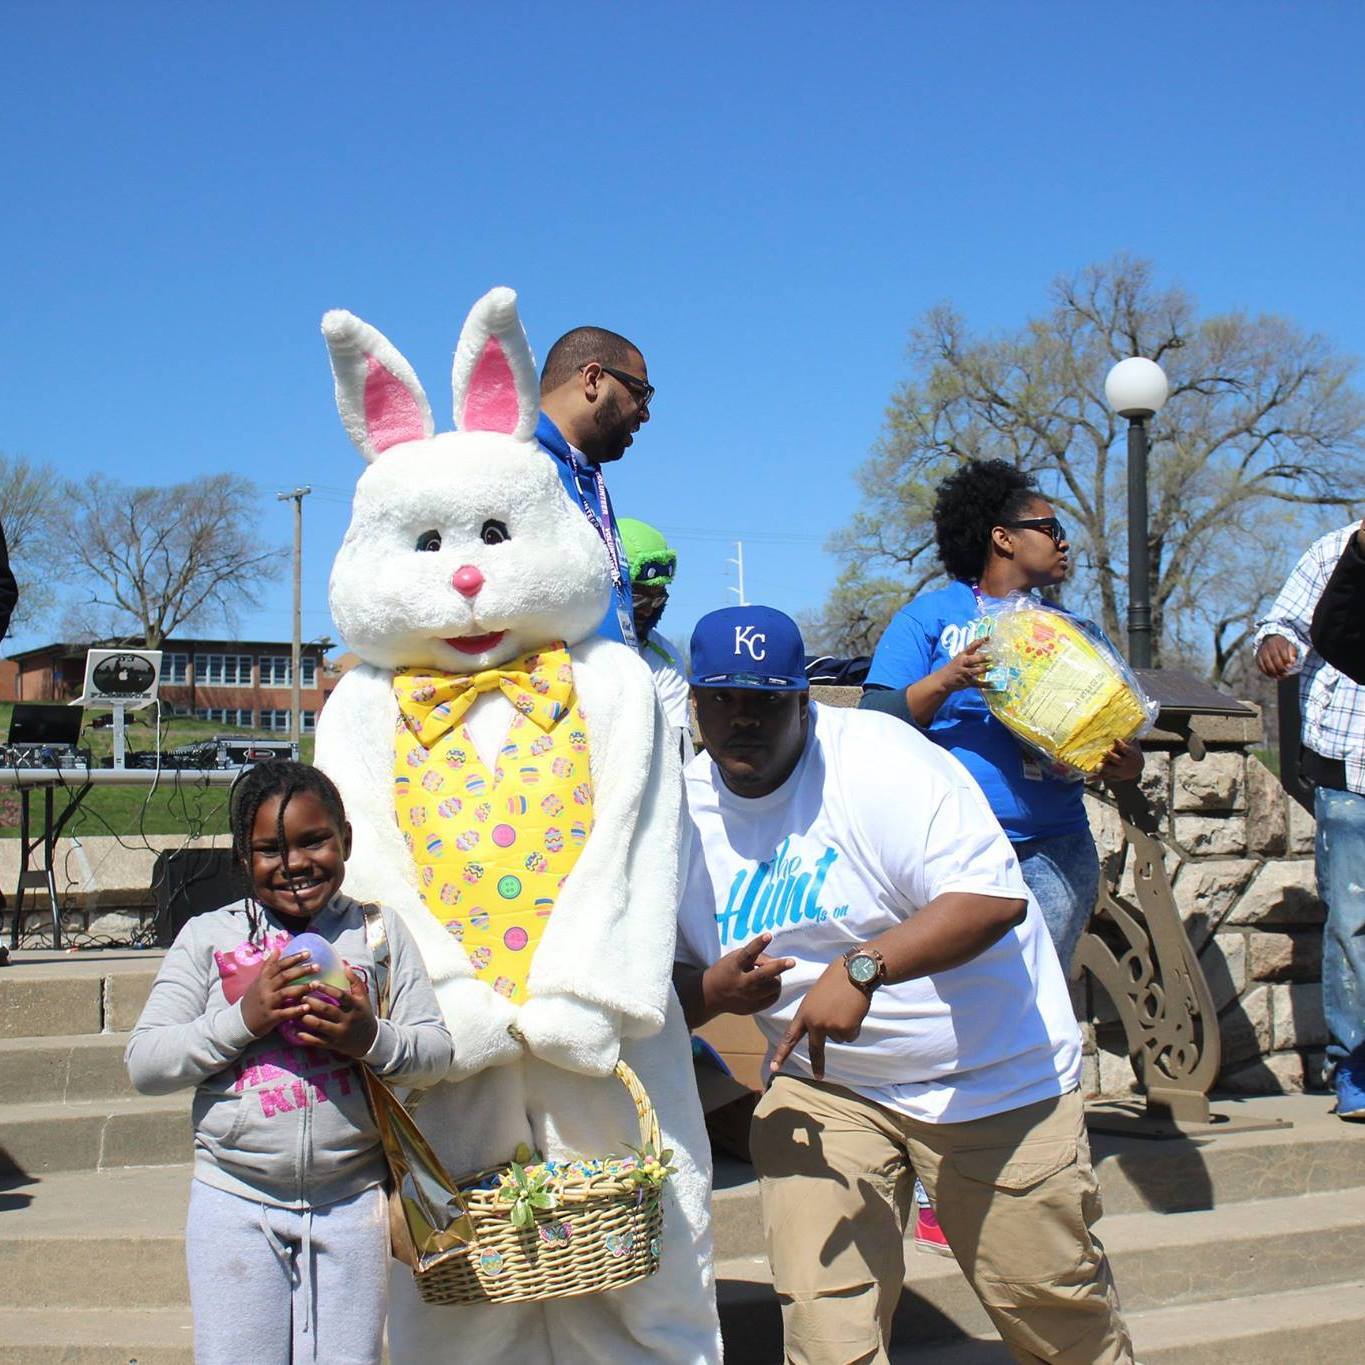 Start with Wy Foundation's Easter Egg Hunt